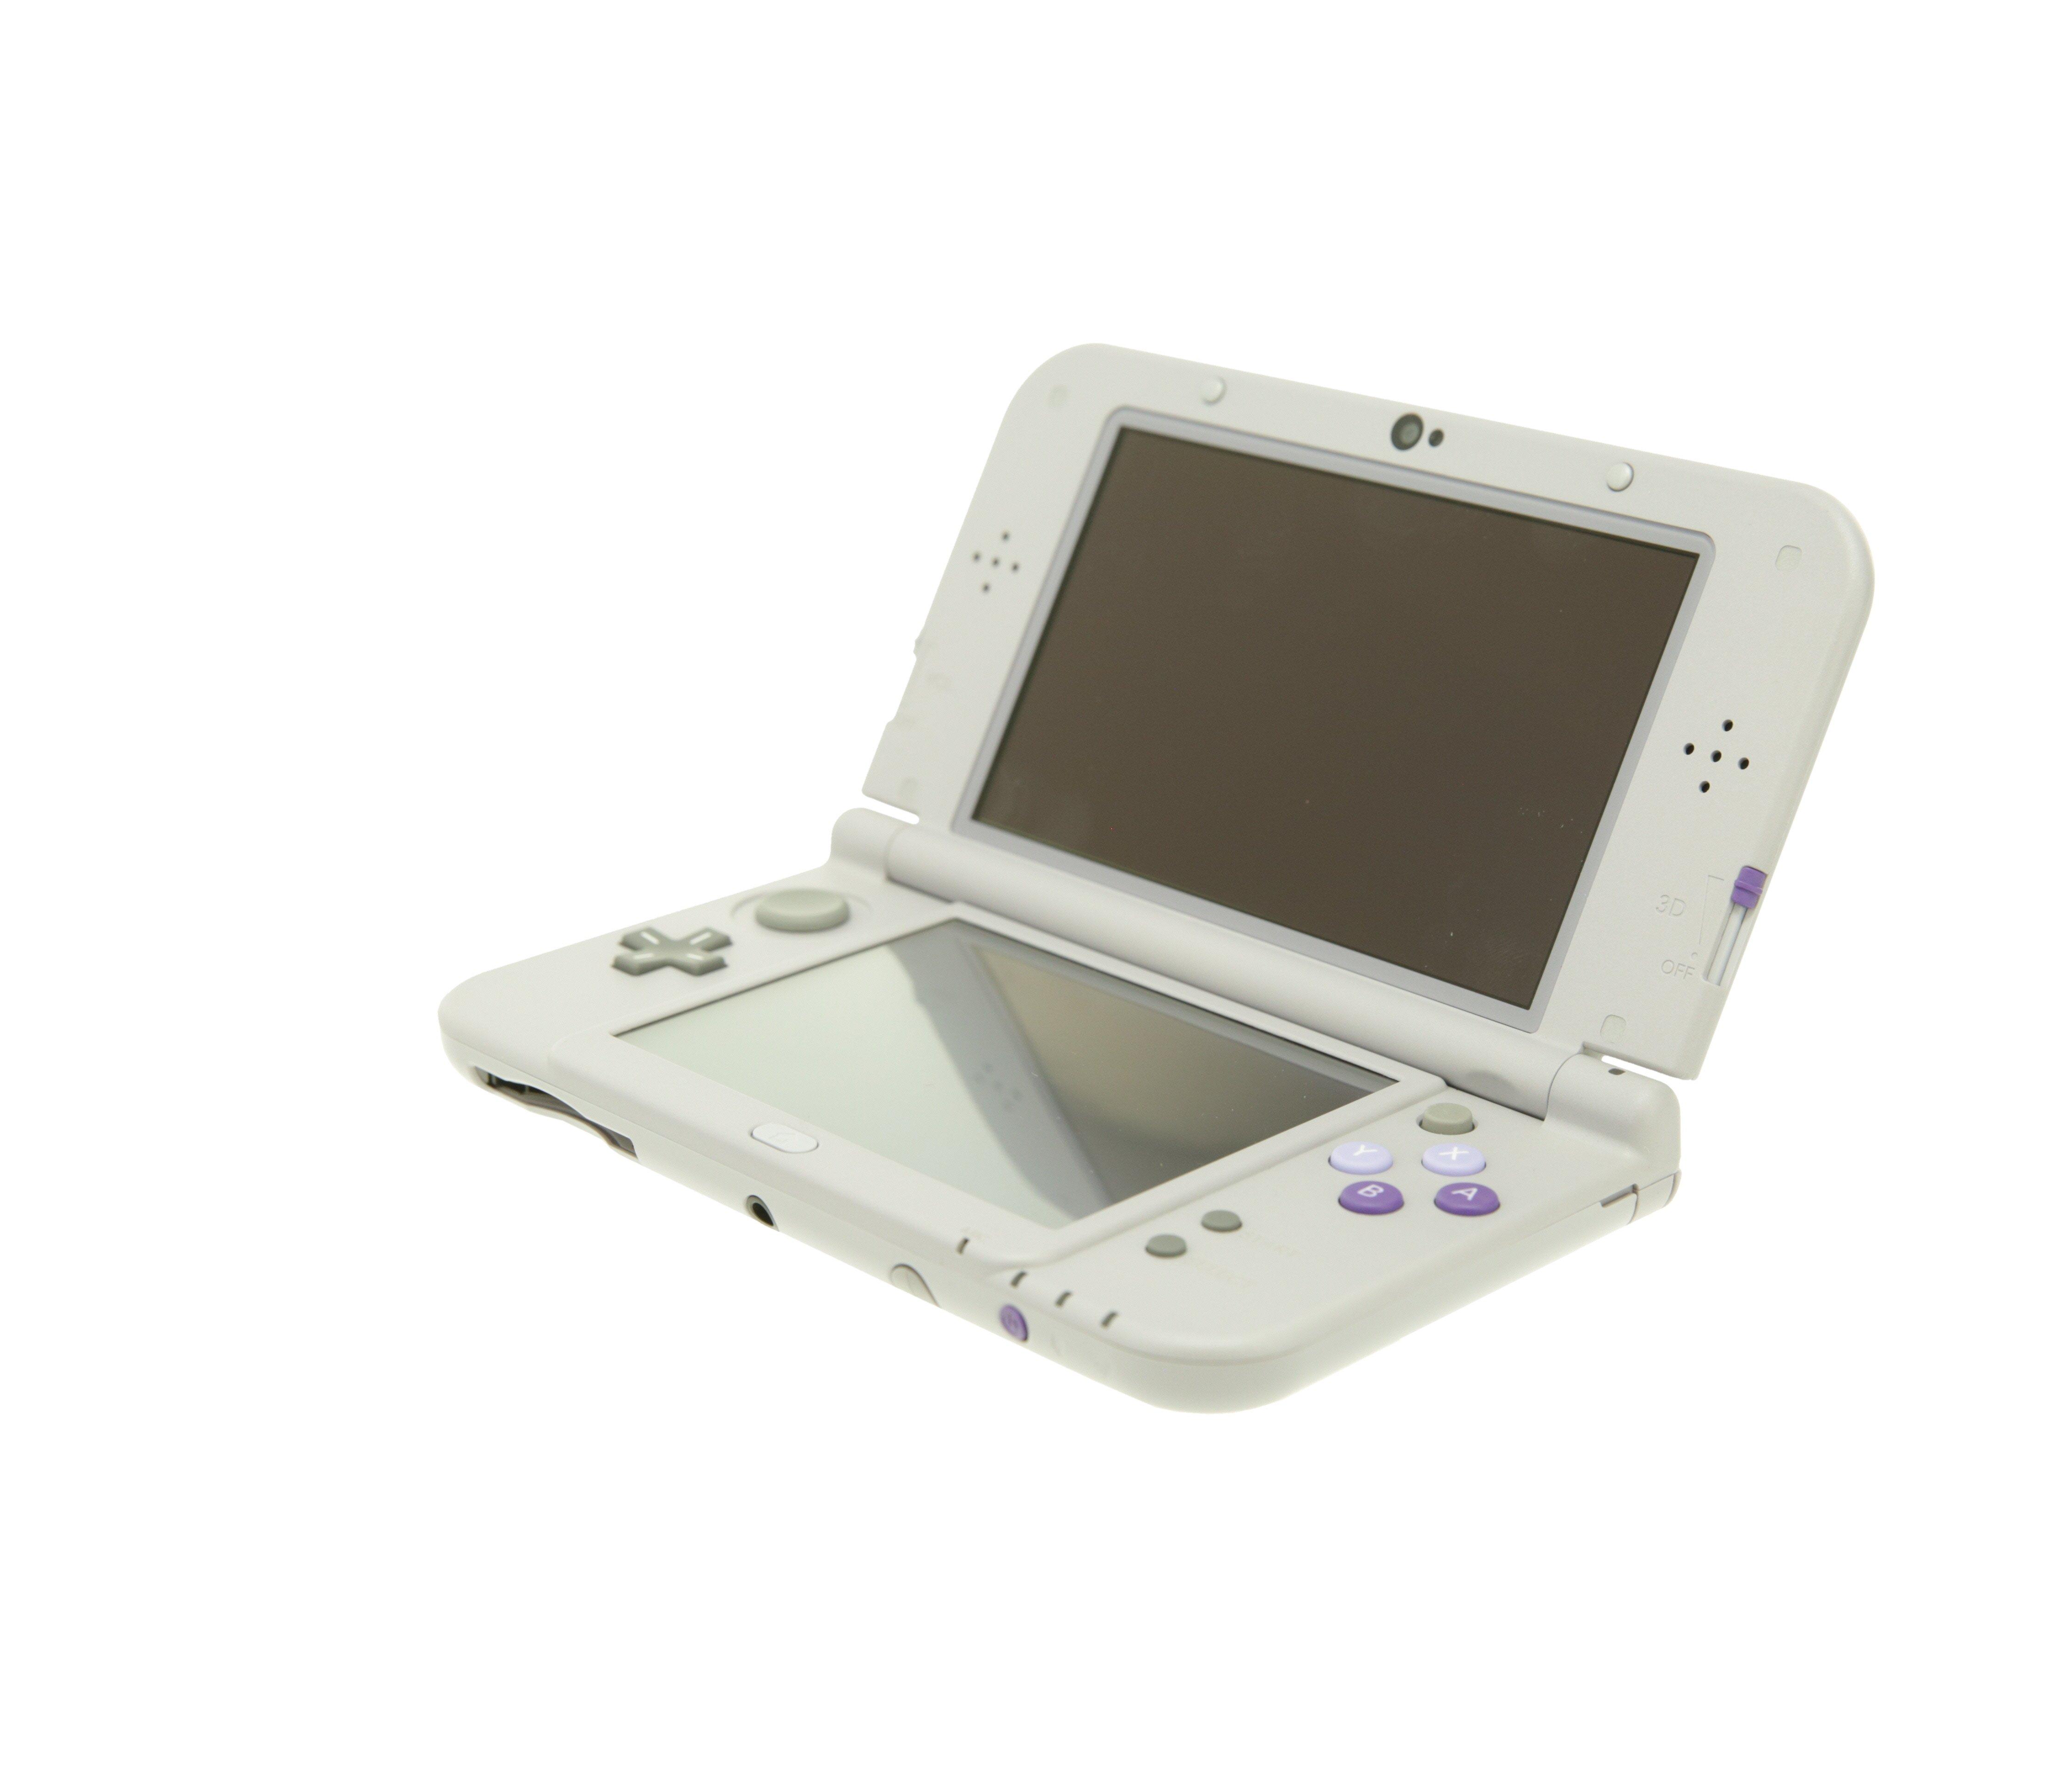 new 3ds refurbished